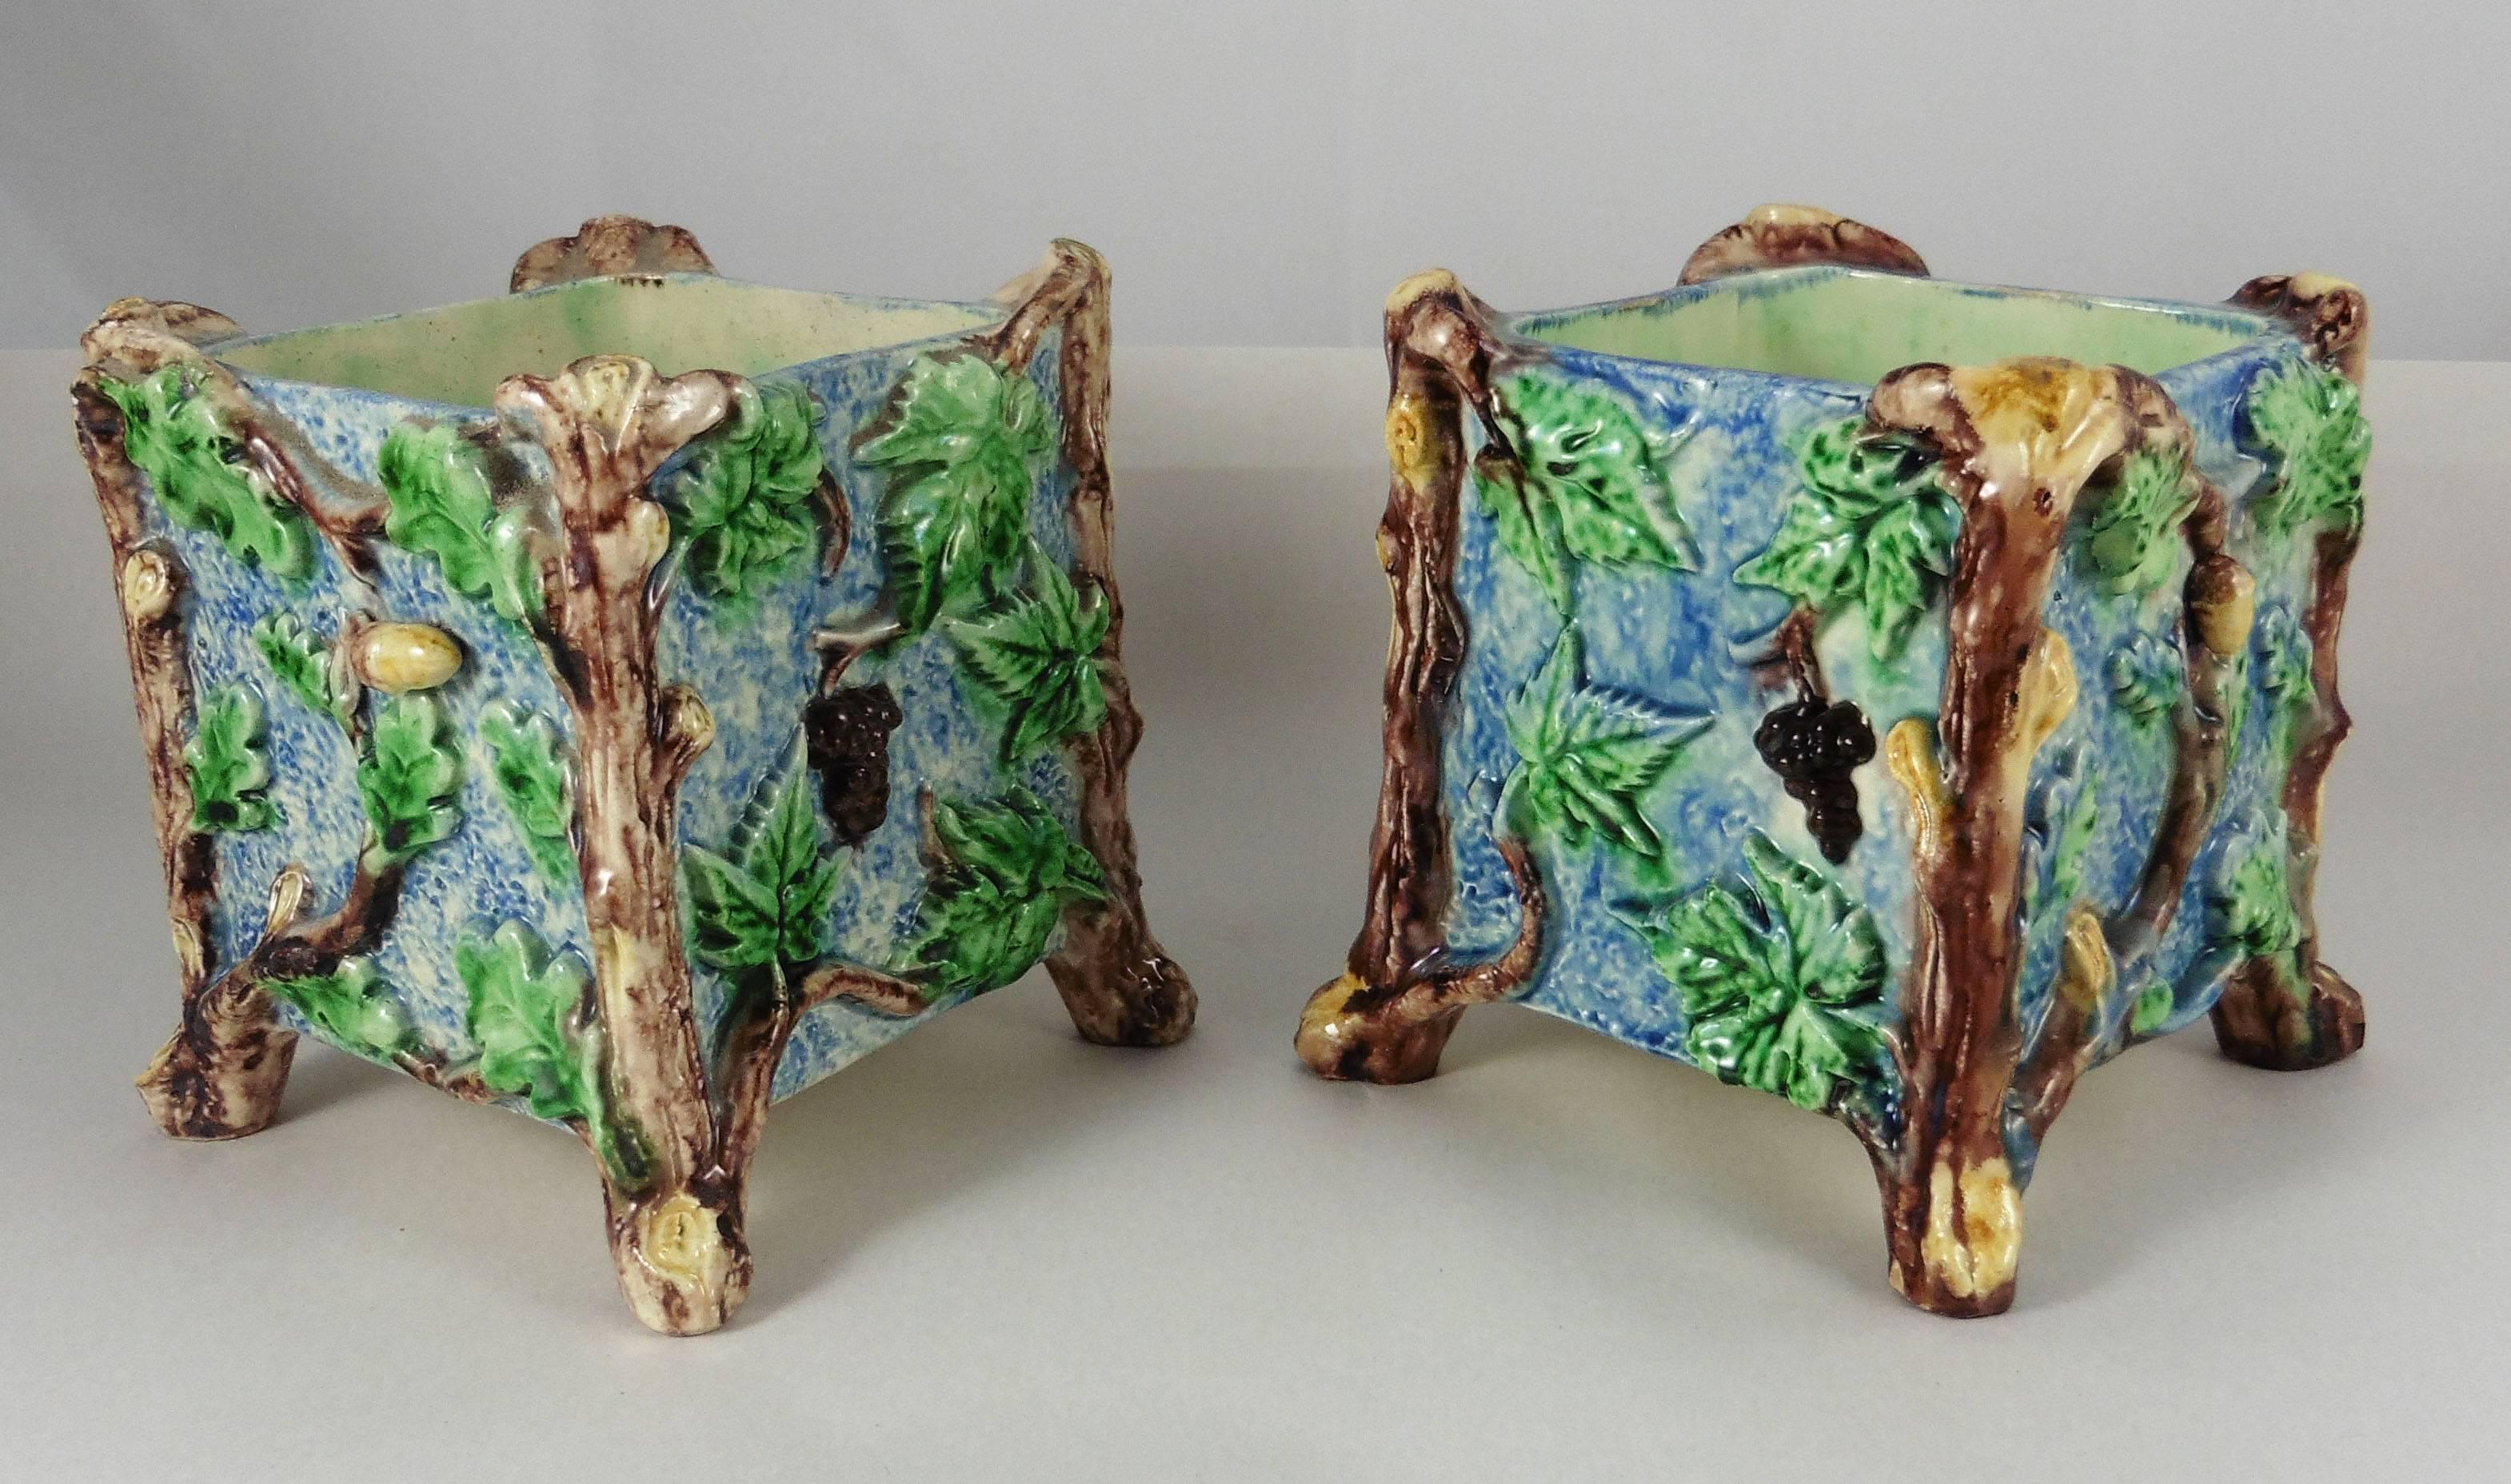 19th pair of Palissy squares jardinieres, two sides with oak leaves and acorns, two sides with grapes signed Thomas Sergent.
Thomas Victor Sergent was an active member of the School of Paris with others ceramists he made platters and other several